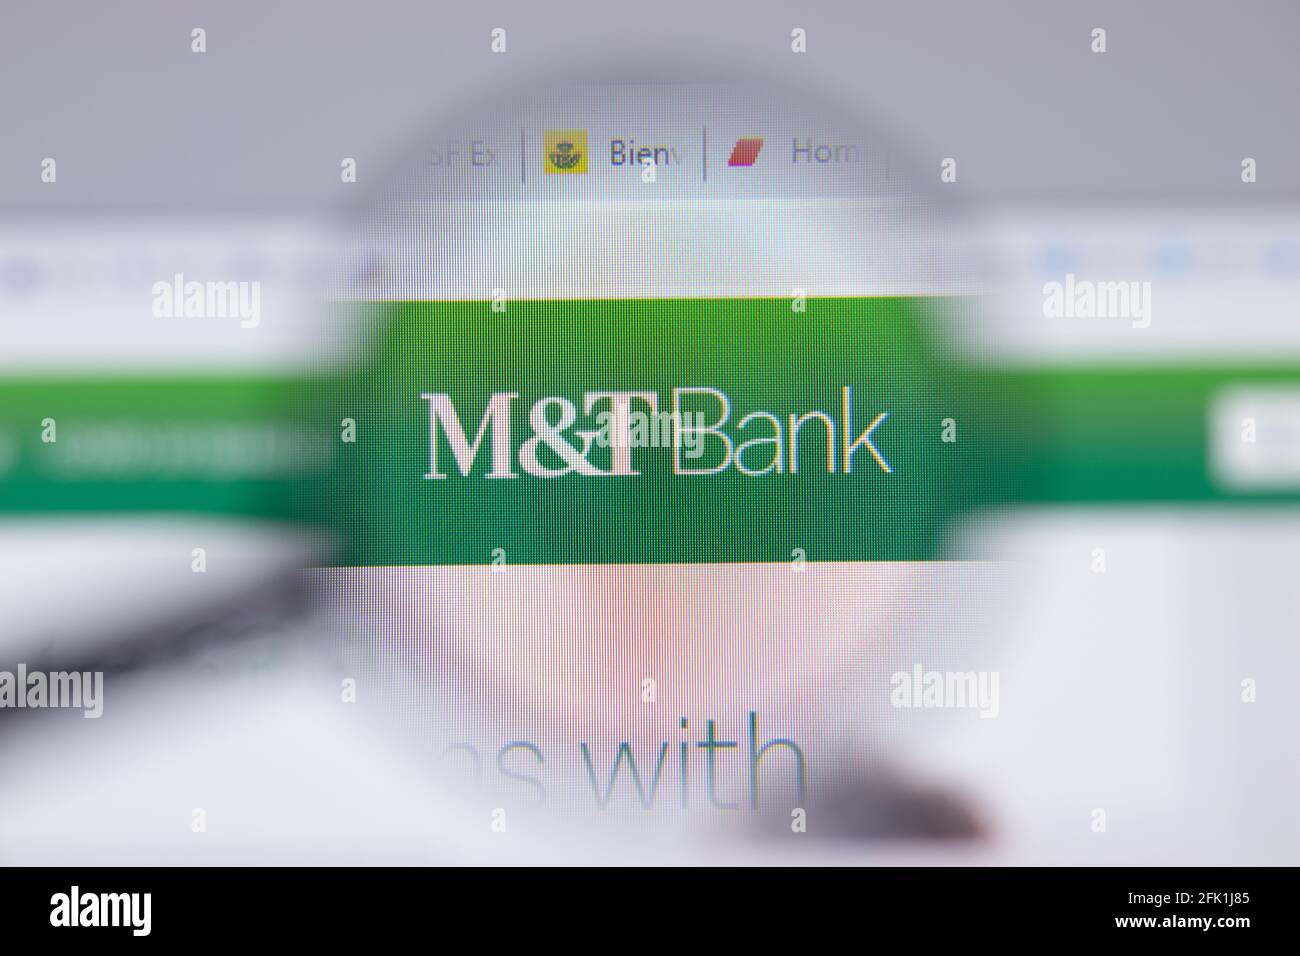 New York, USA - 26 April 2021: M T Bank logo close-up on website page, Illustrative Editorial Stock Photo